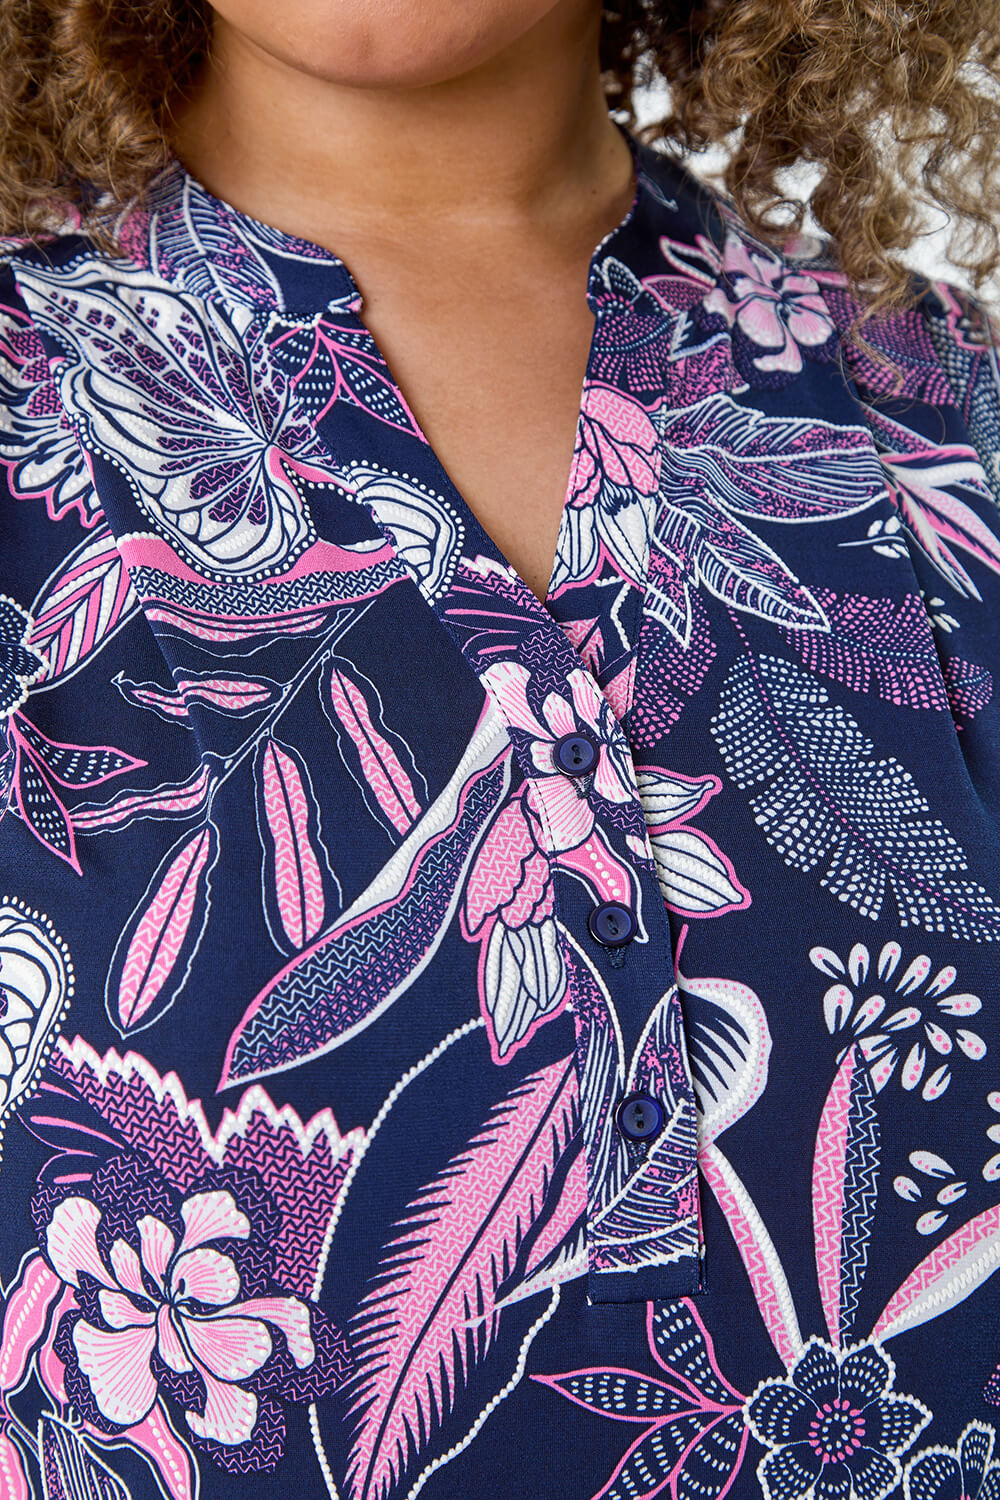 PINK Curve Textured Floral Print Stretch Top, Image 5 of 5